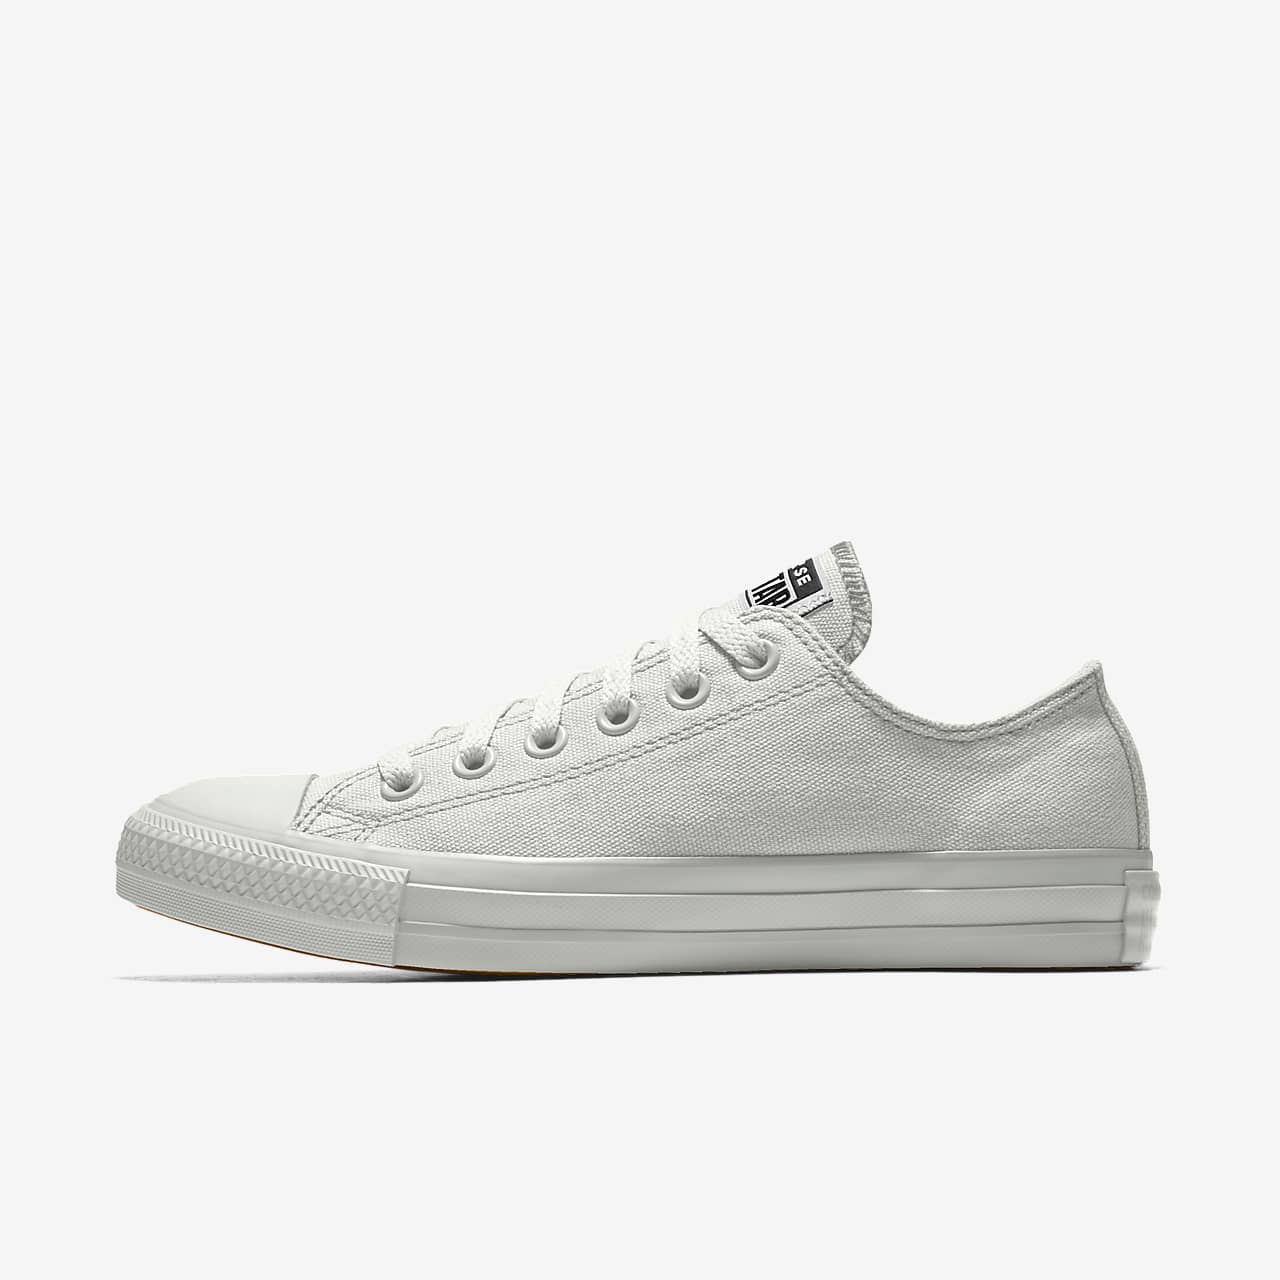 converse white low top leather